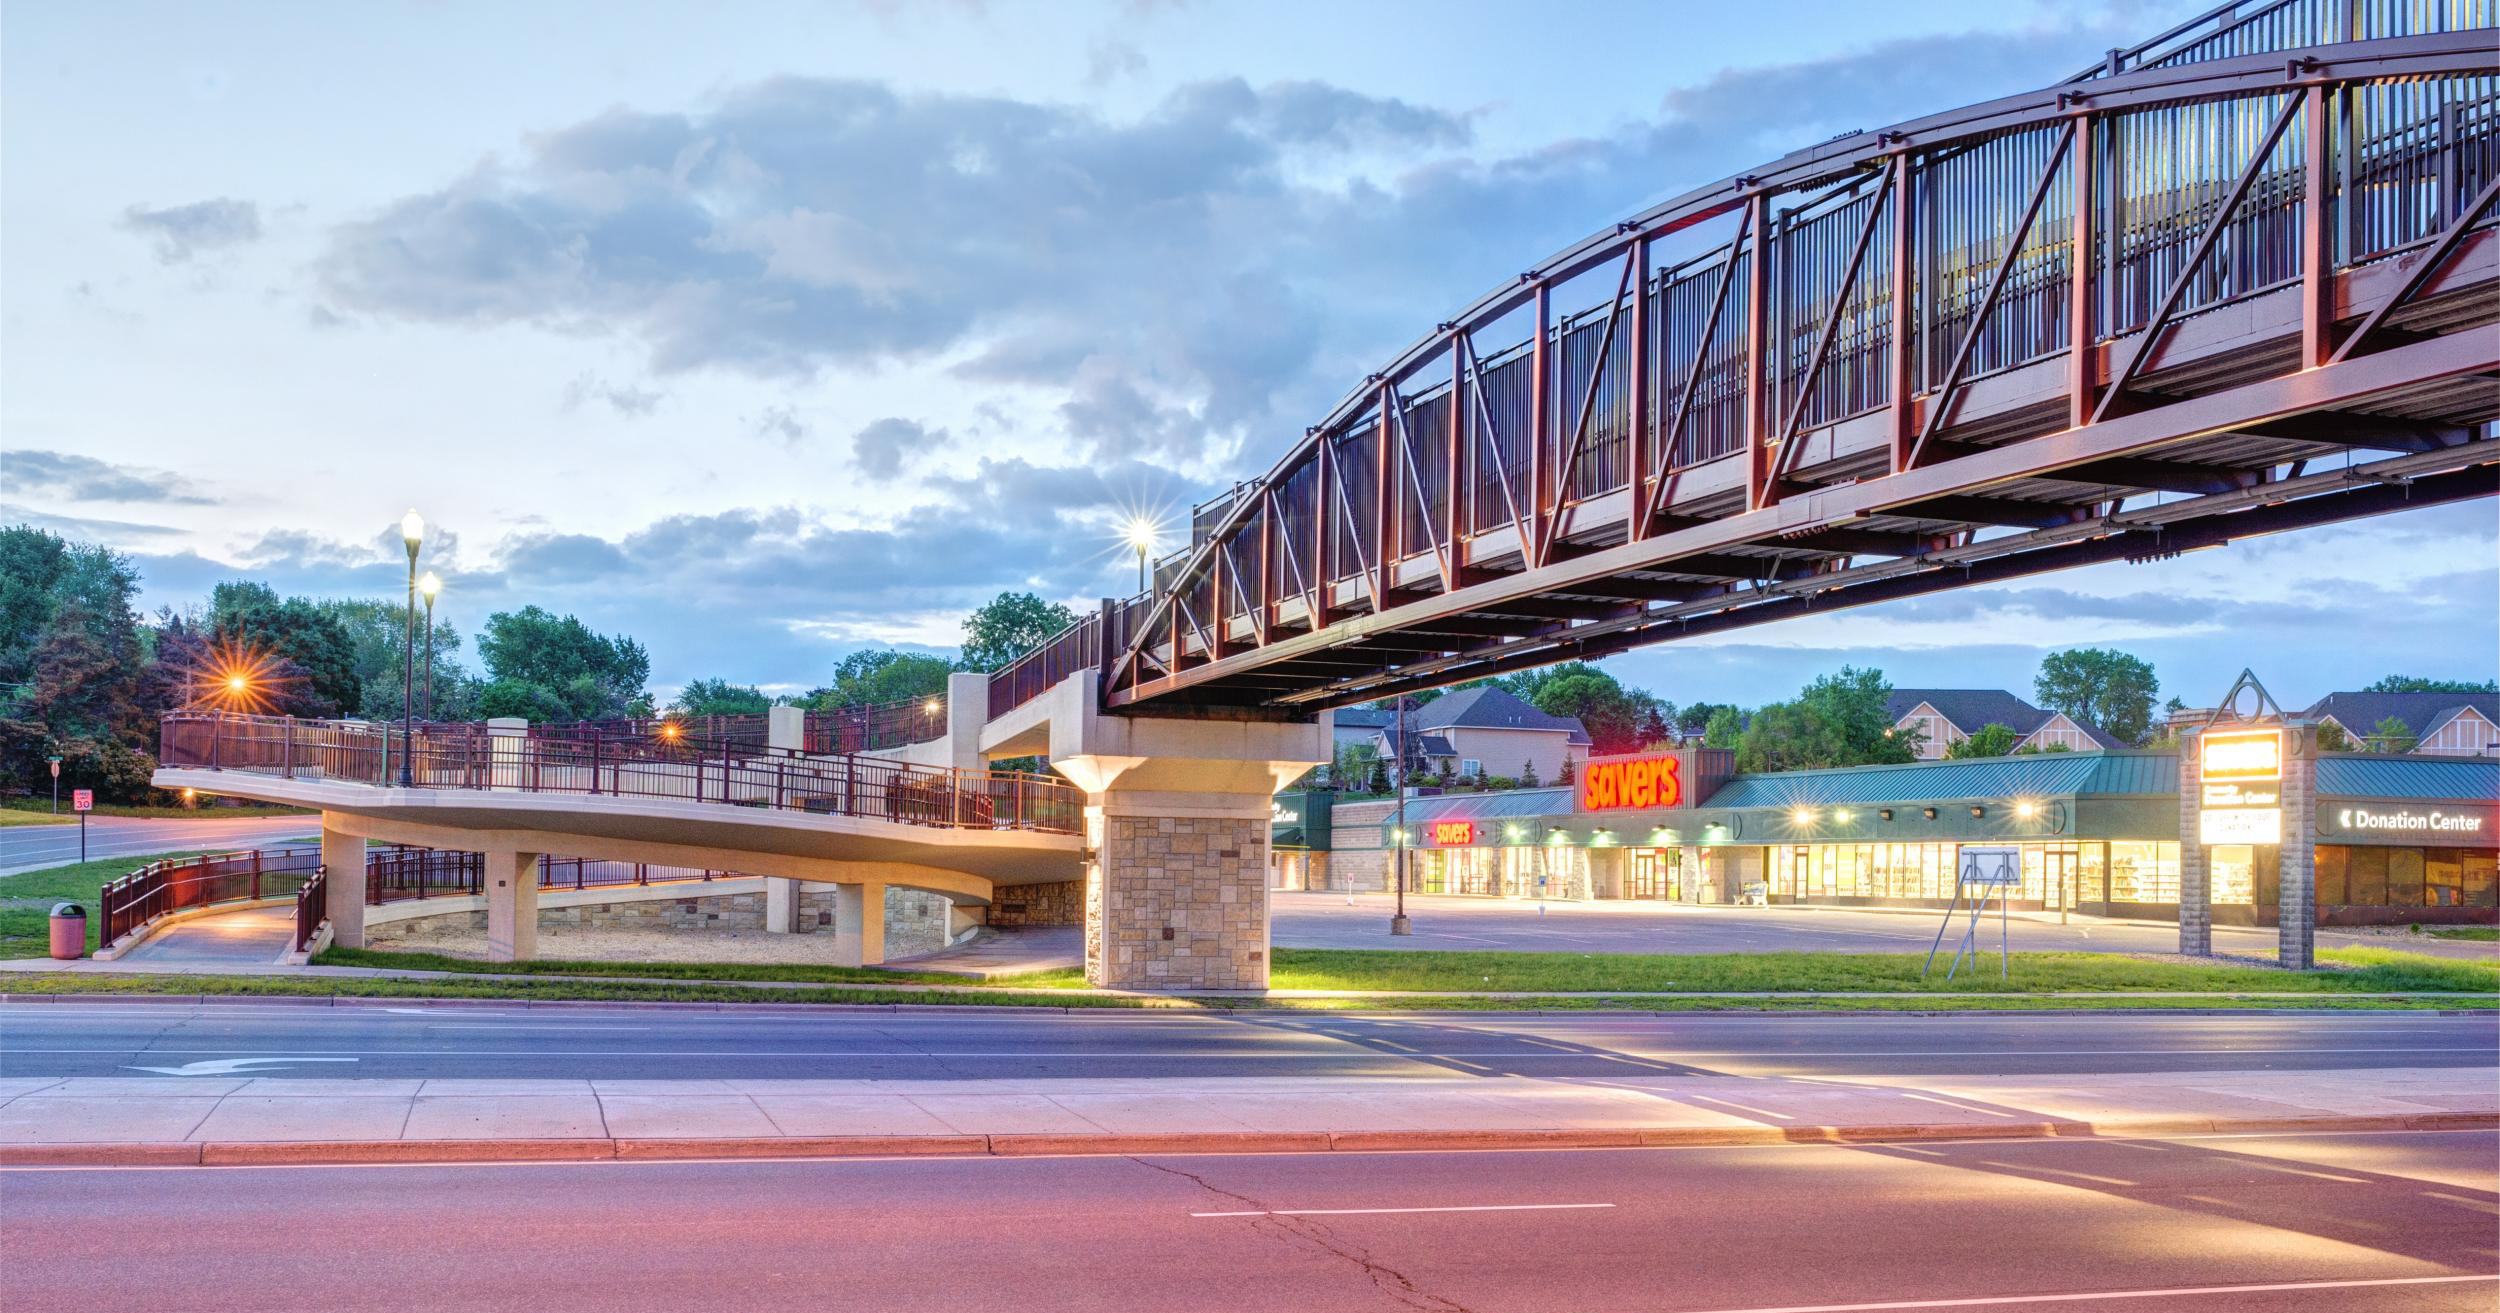 Foot bridge over Central Avenue at 49th Avenue in Columbia Heights, MN